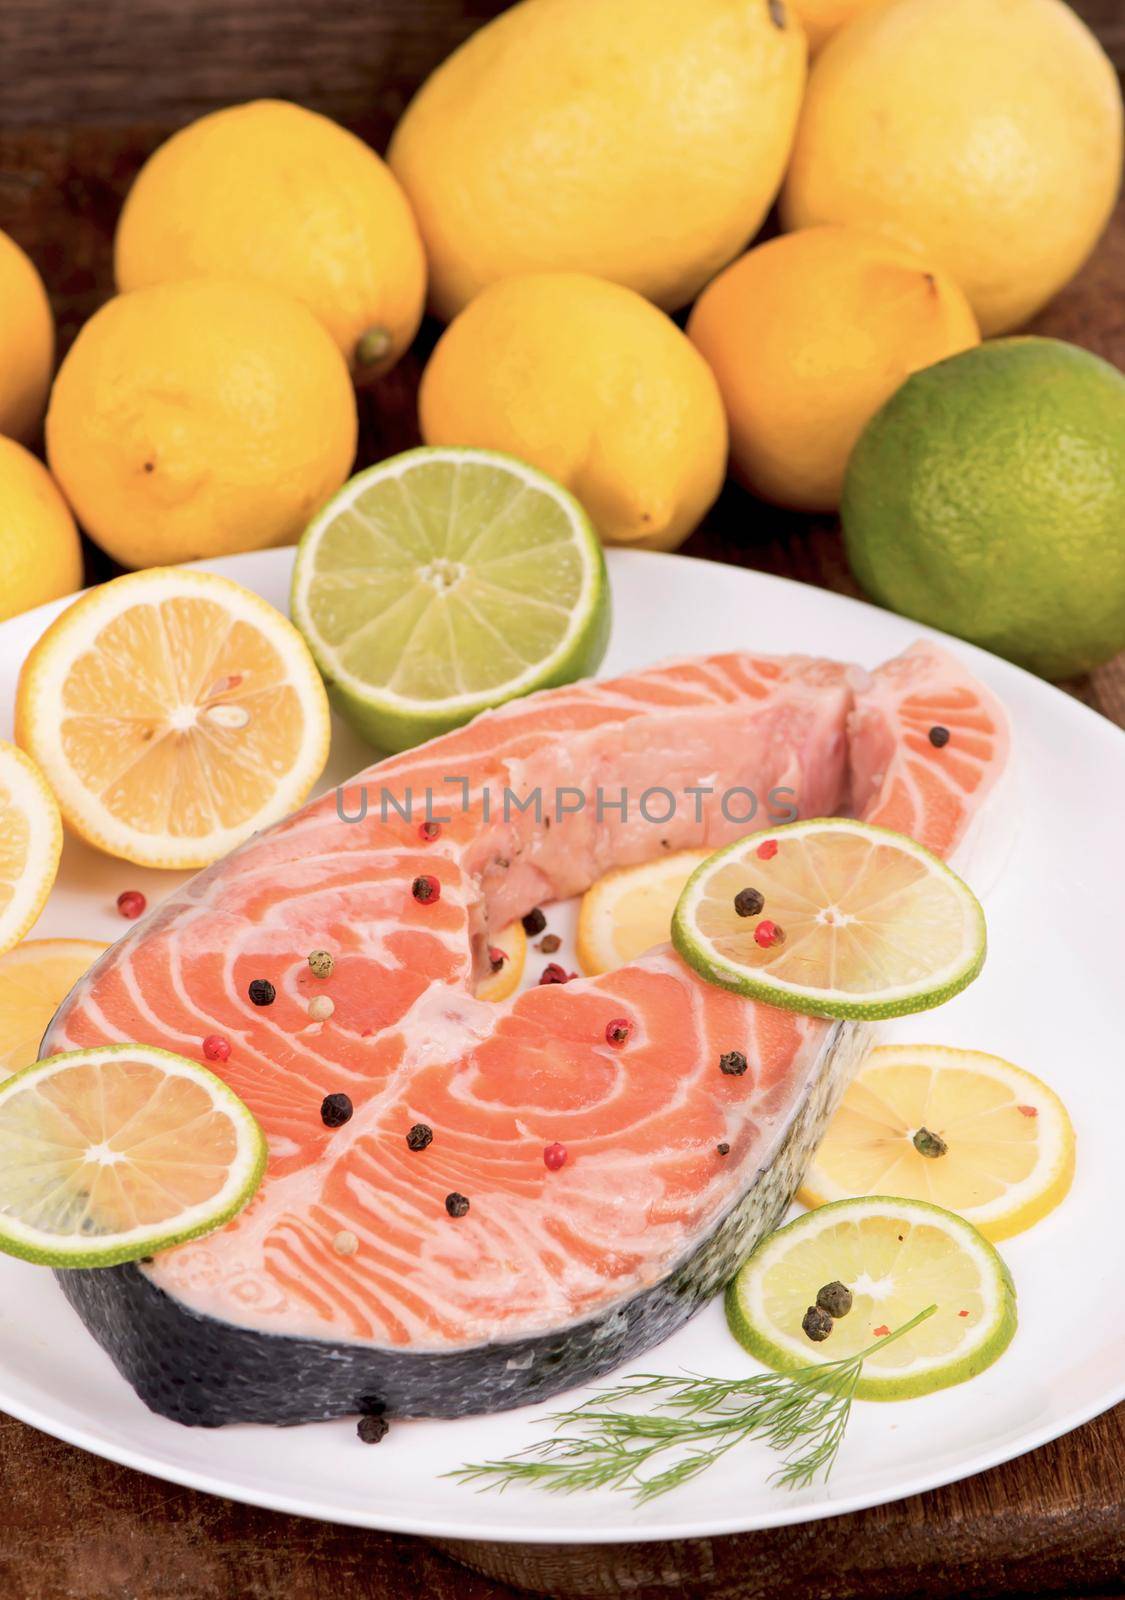 Steak of red fish and sliced lemons on white. by aprilphoto